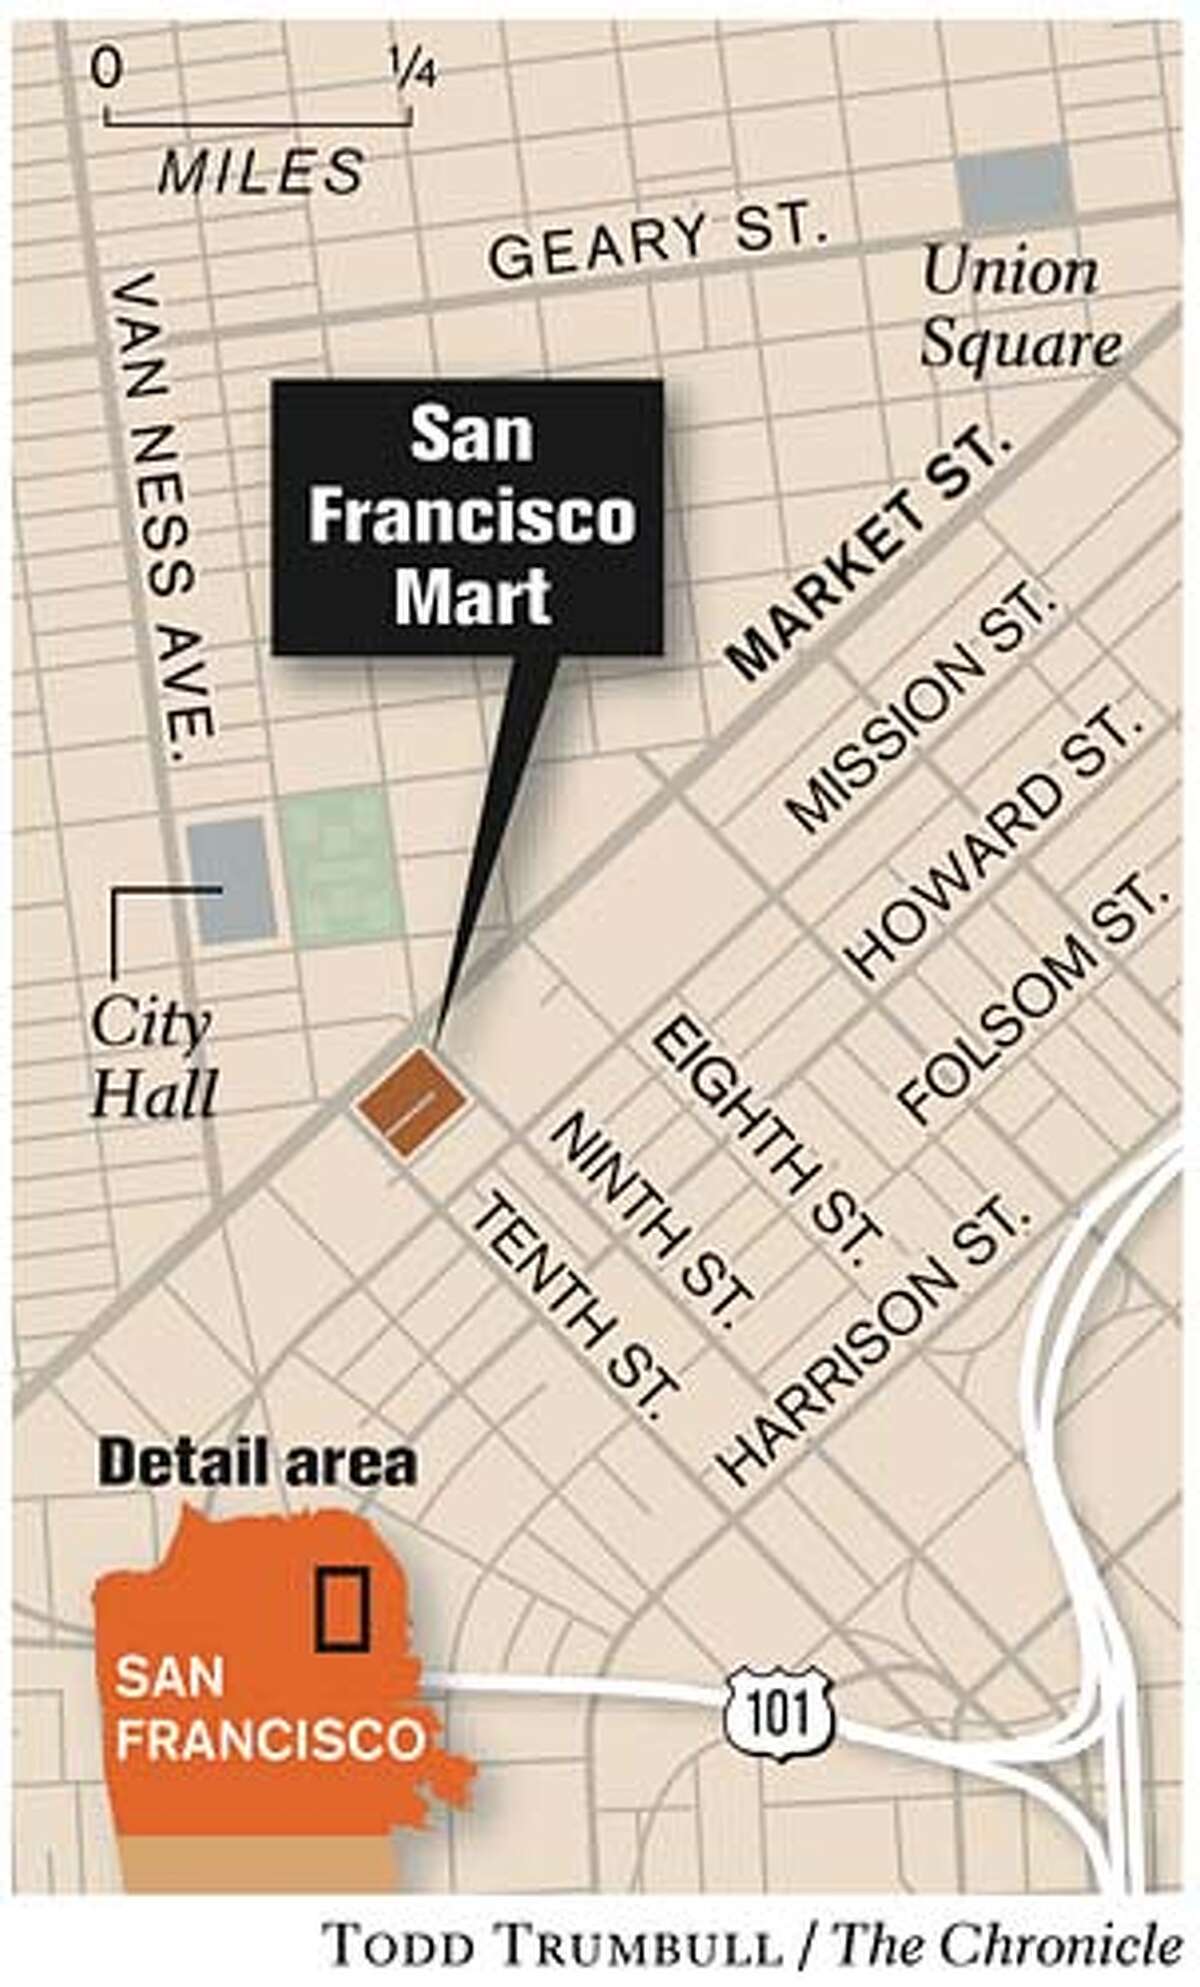 San Francisco Mart location. Chronicle graphic by Todd Trumbull